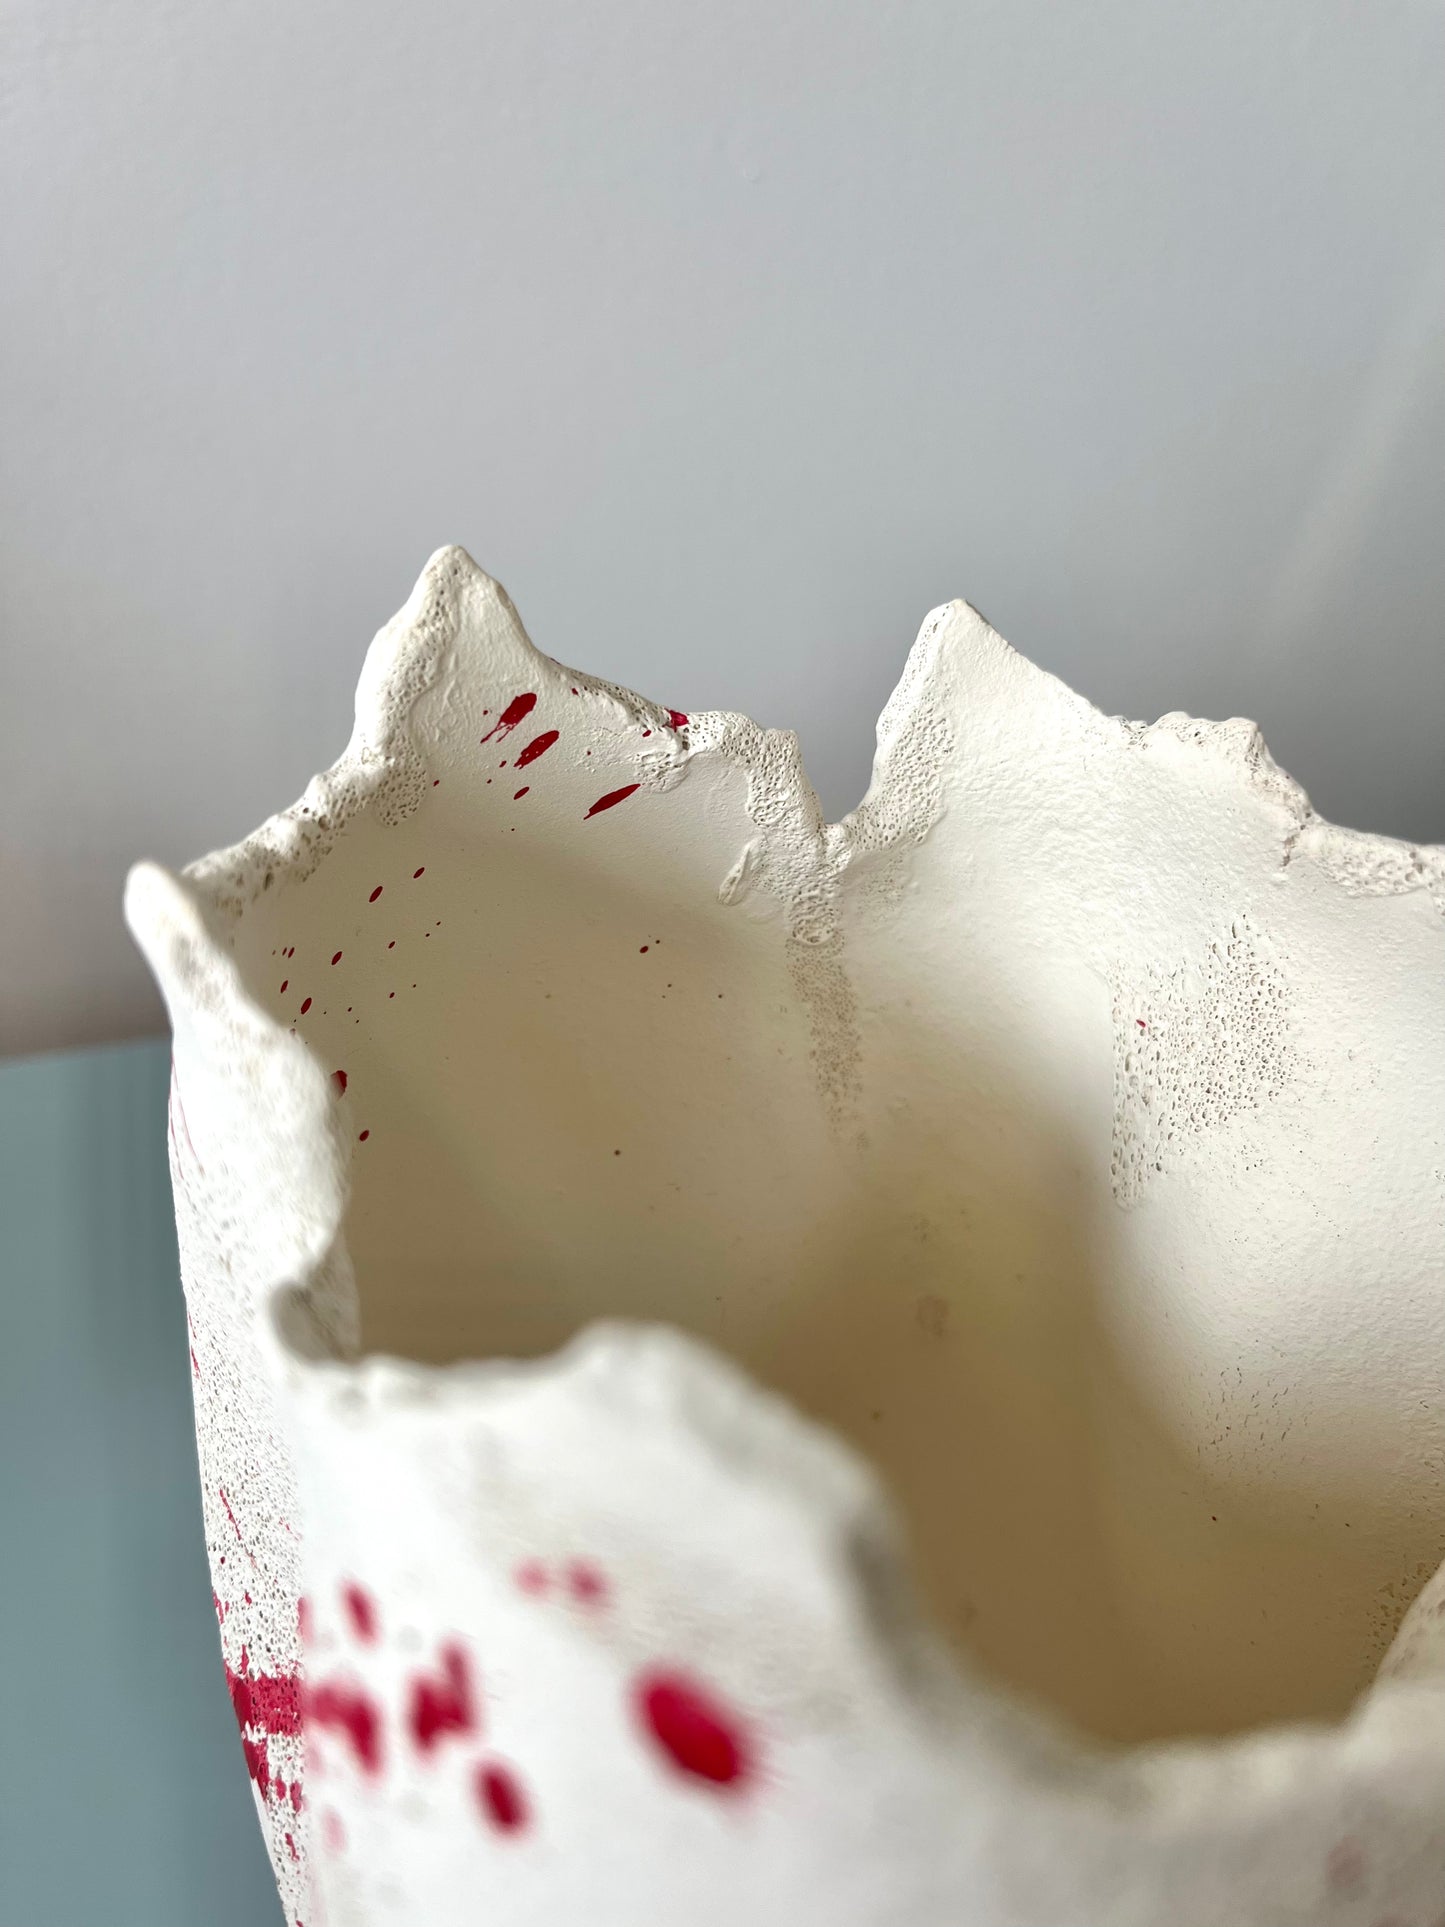 Postmodern White and Red Sculptural Jagged Edge Vessel